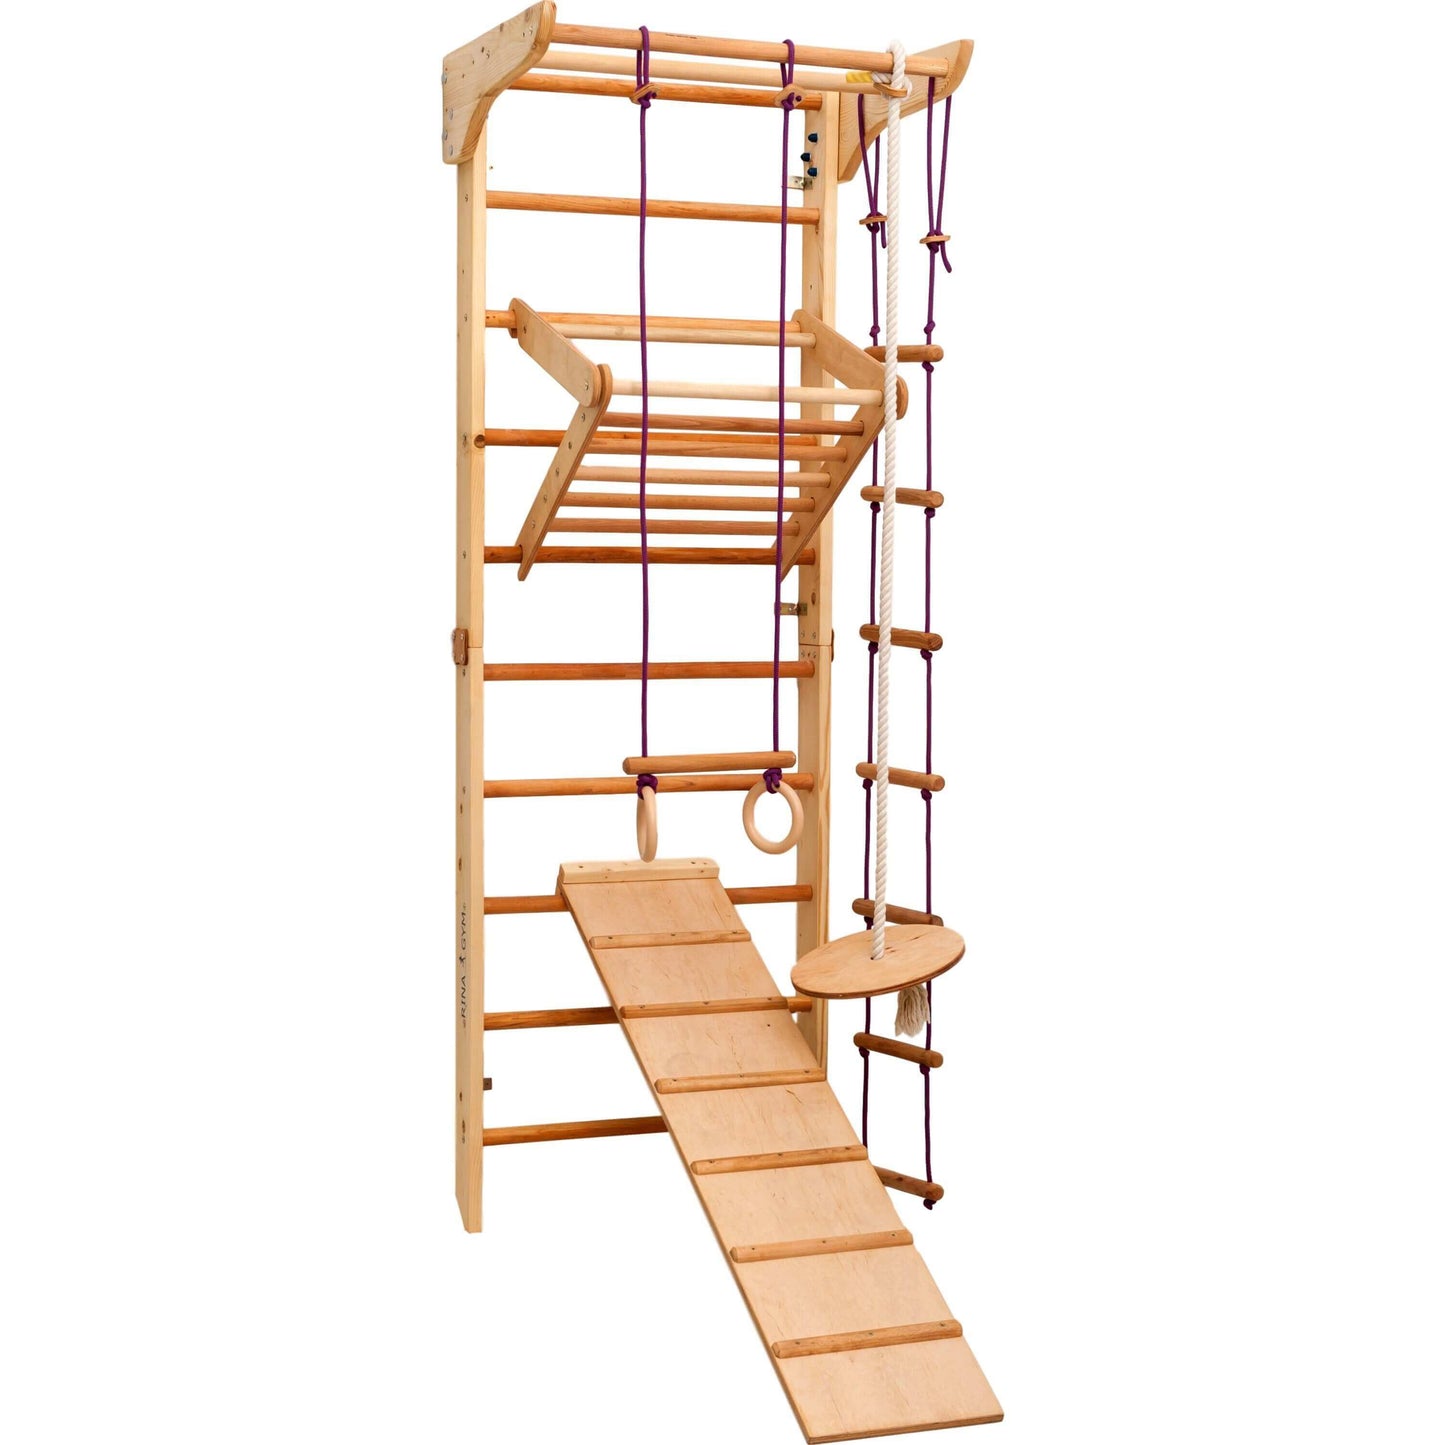 Climbing wall INA for children, untreated wood